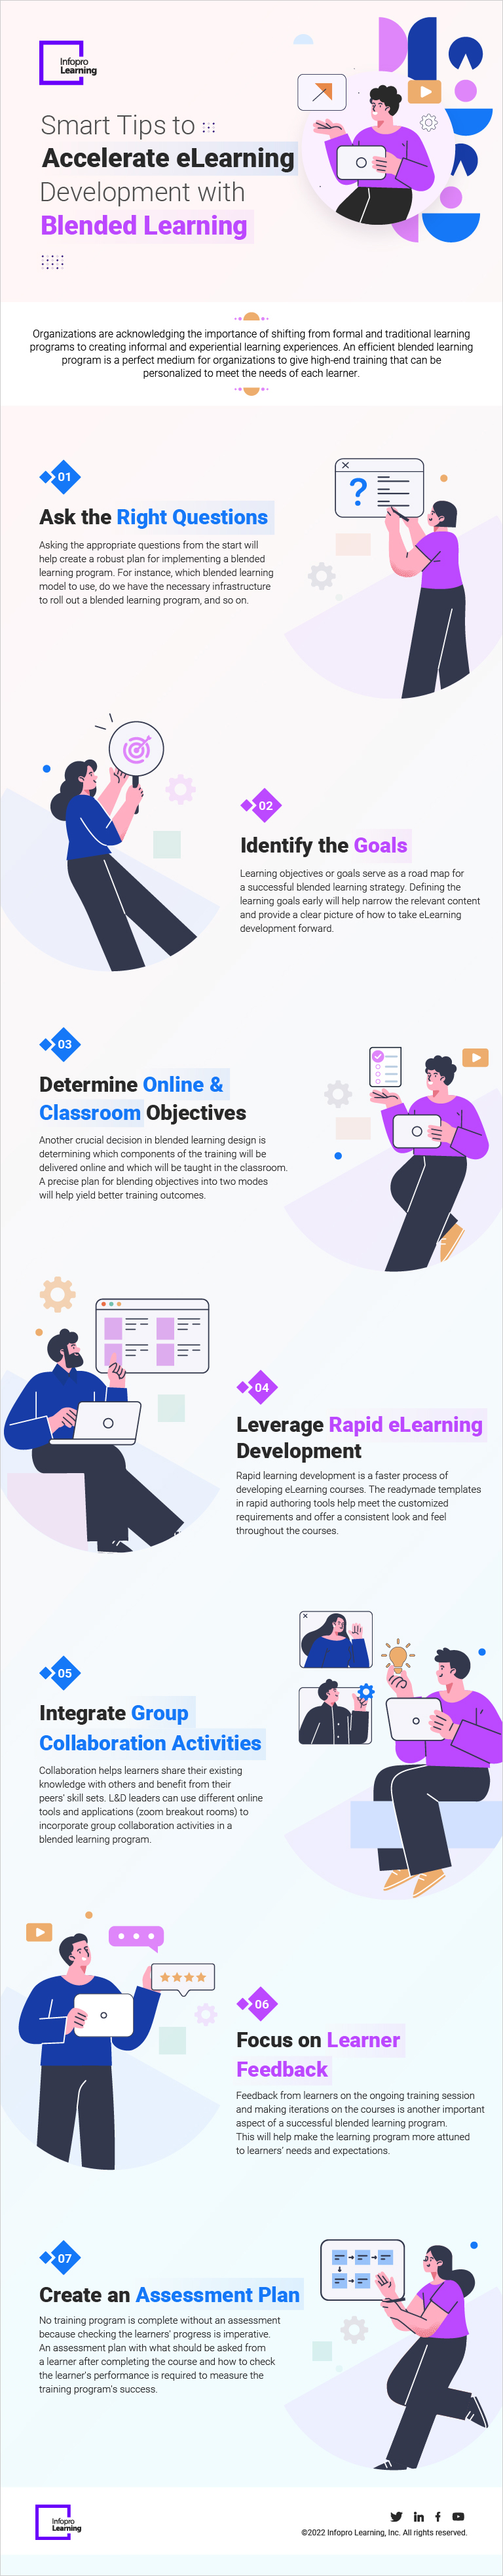 Smart-tips-to-accelerate-elearning-development-with-blended-learning